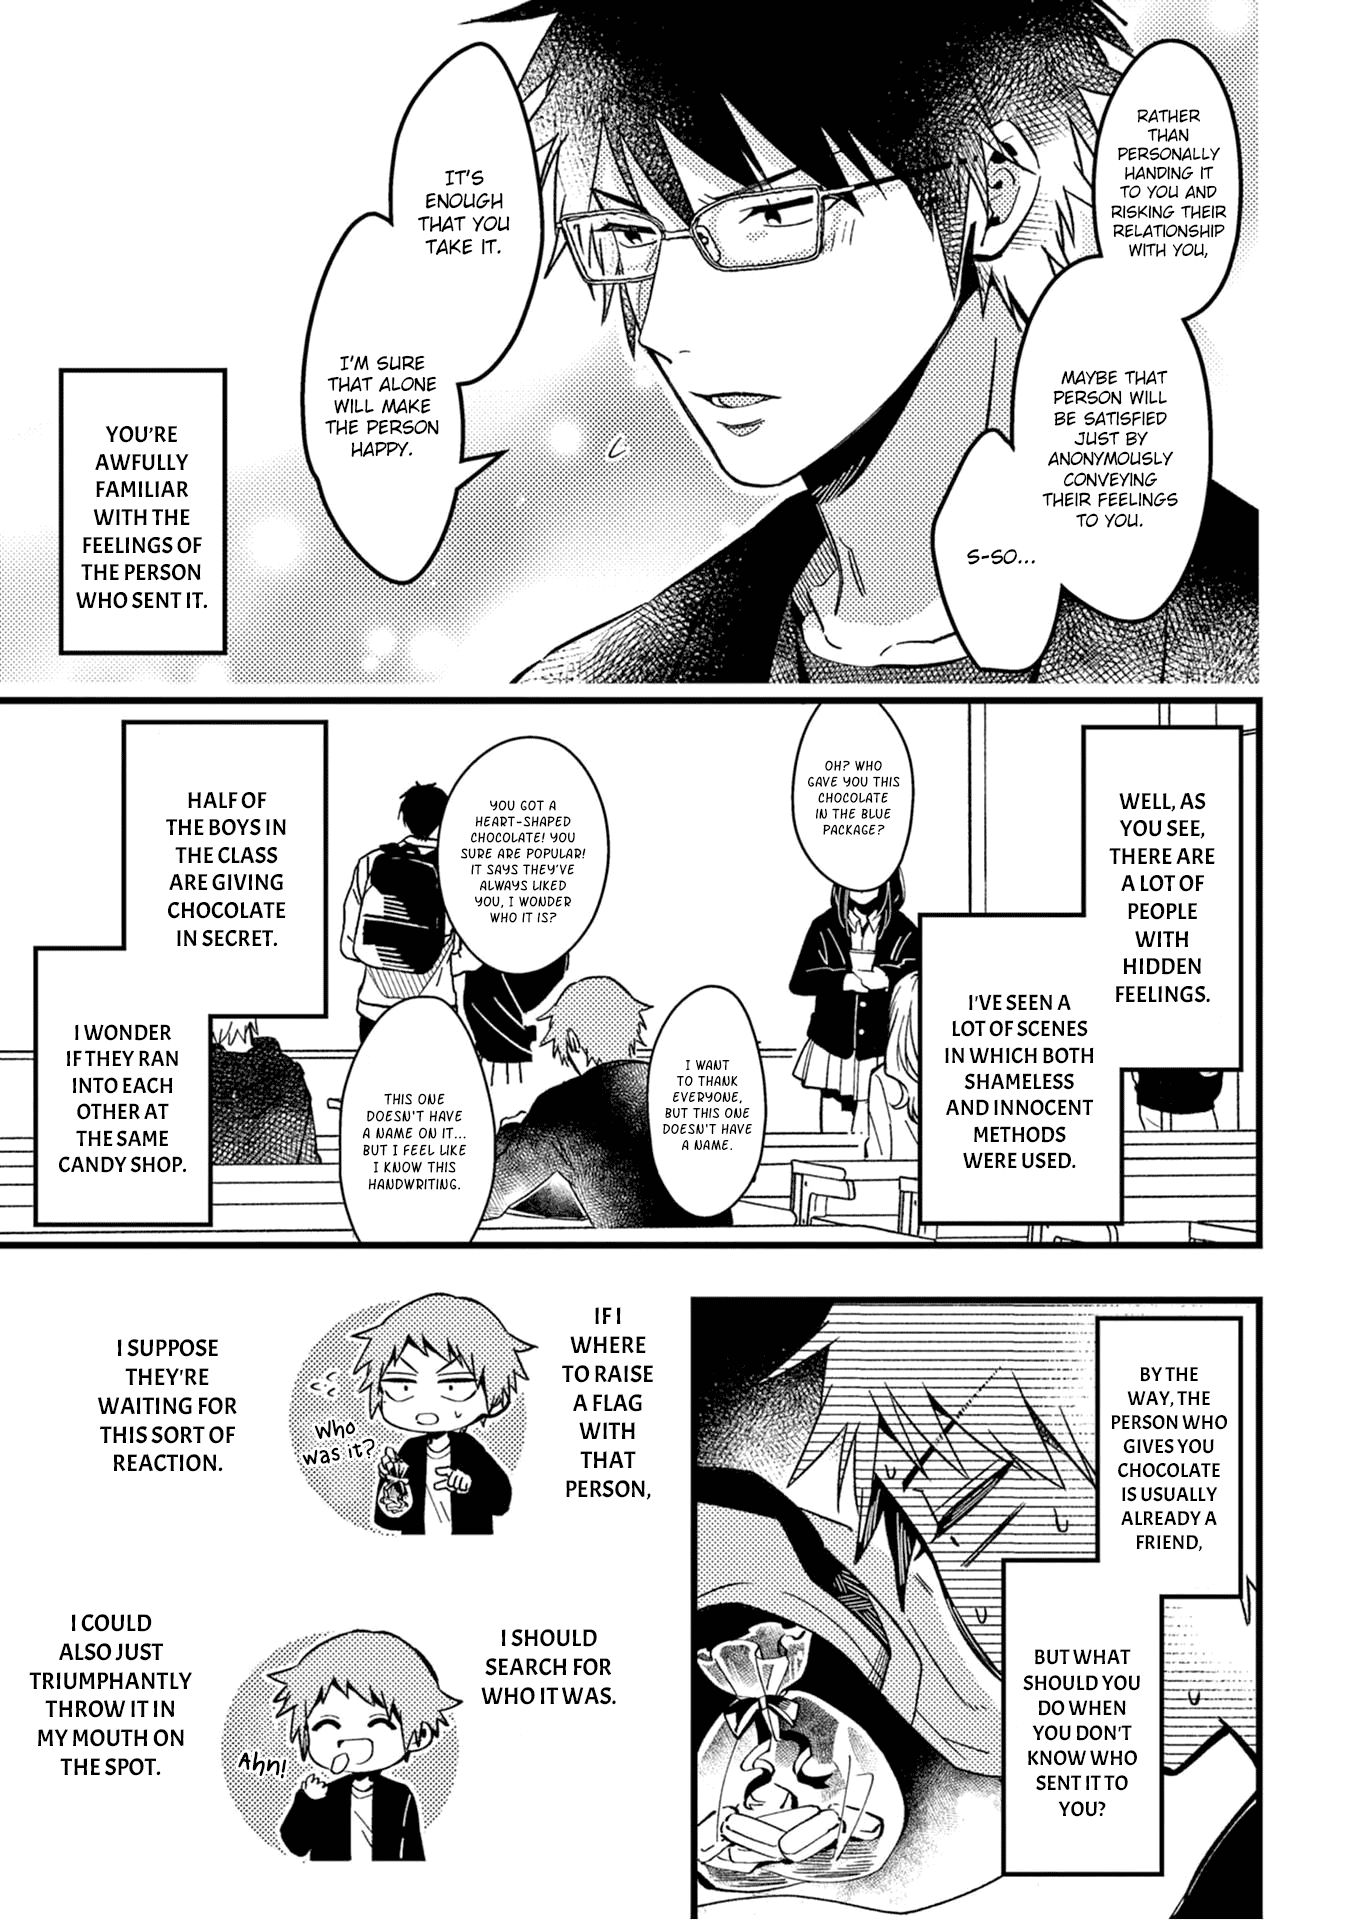 A World Where Everything Definitely Becomes BL vs. The Man Who Definitely Doesn't Want To Be In A BL - chapter 26 - #4